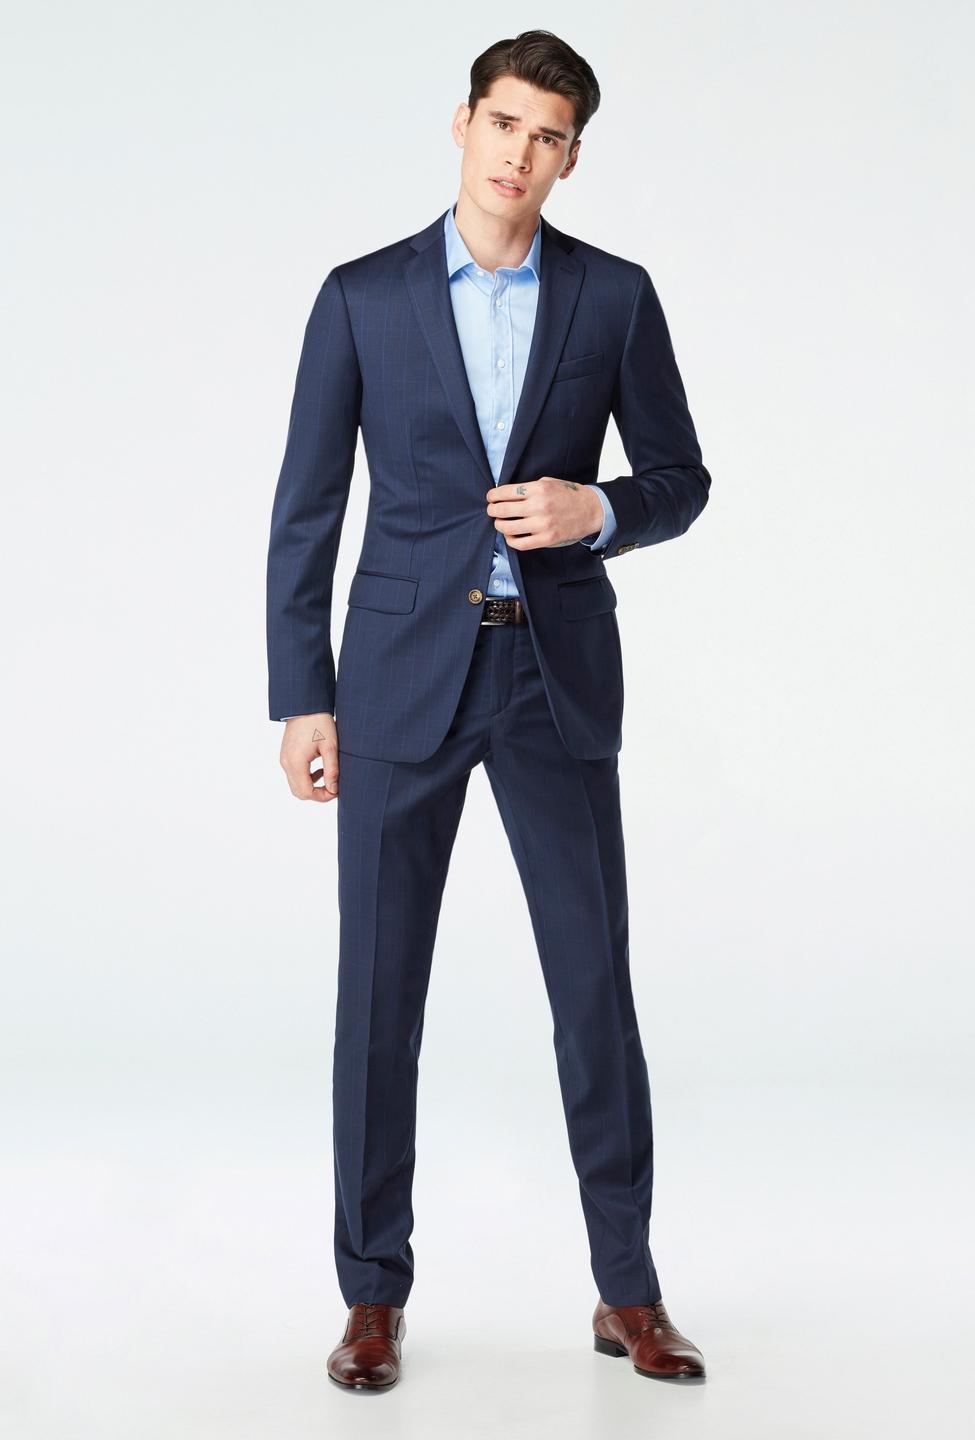 Hemsworth Prince of Wales Midnight Blue Suit